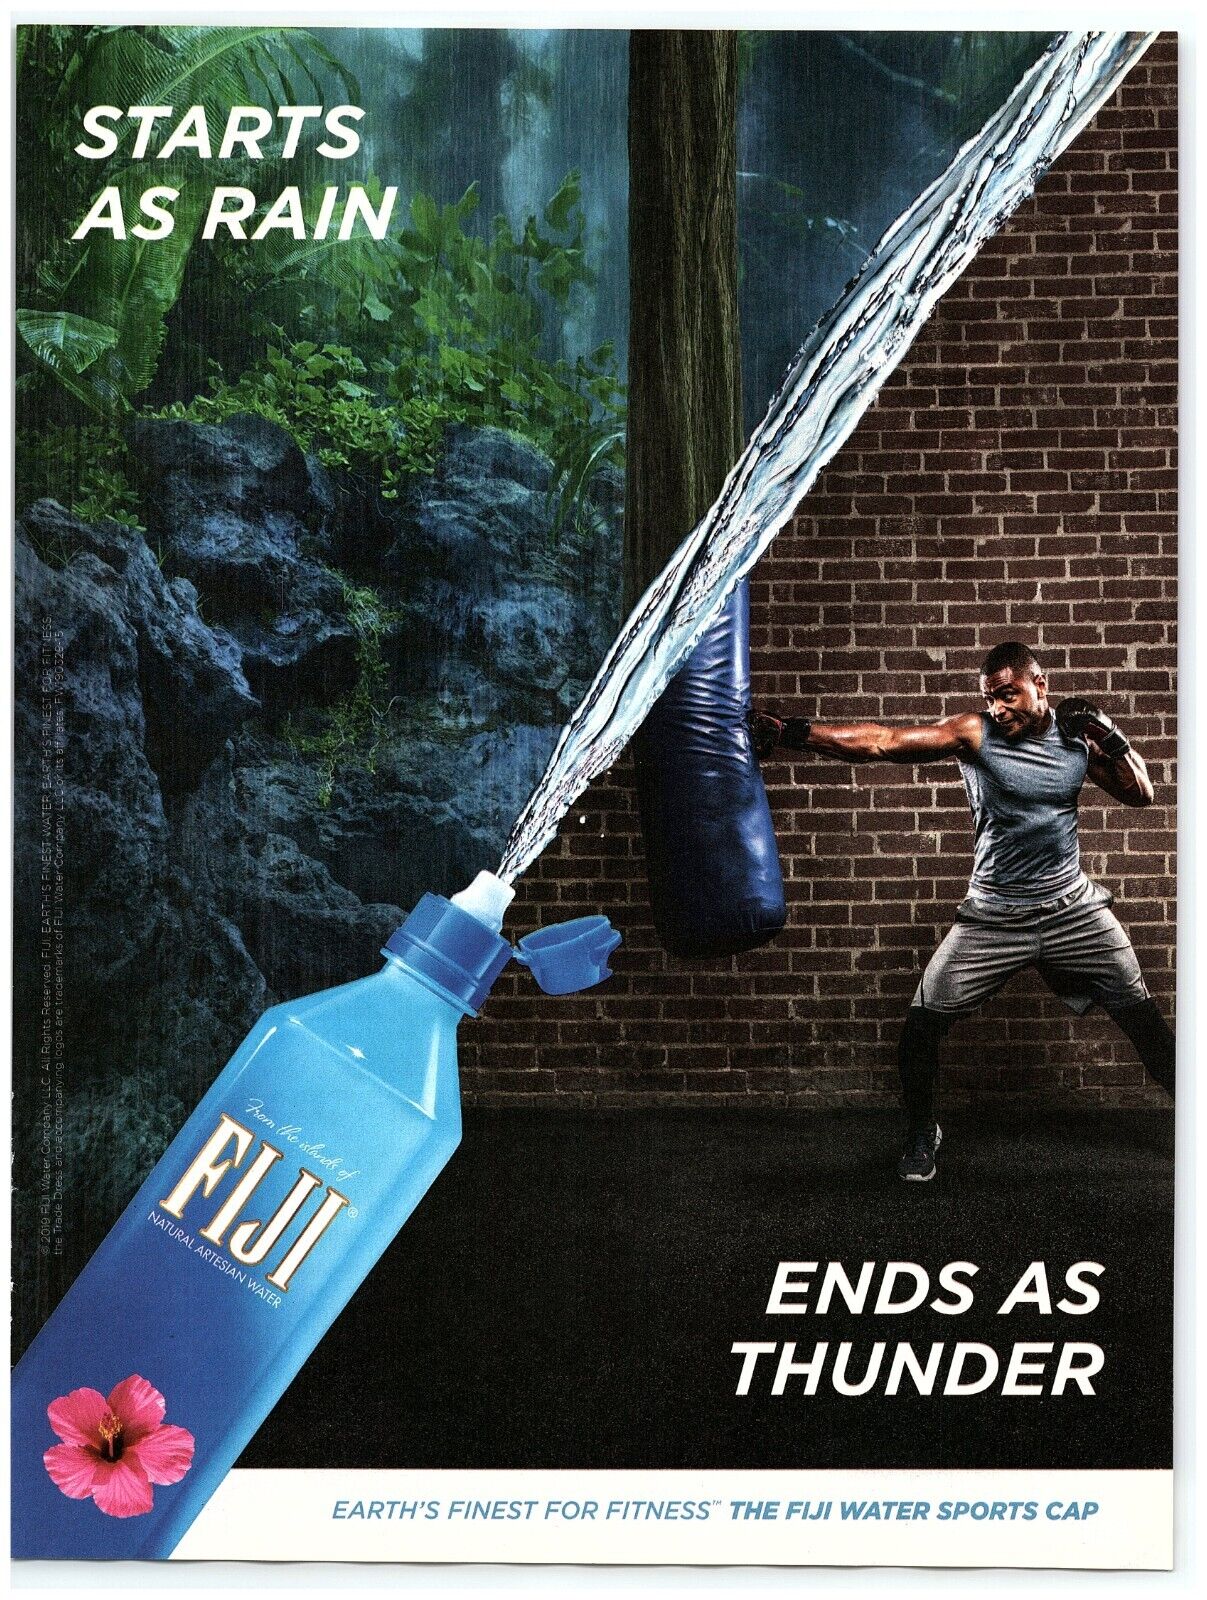 2019 Fiji Water Print Ad Starts As Rain Ends As Thunder Rainforest Boxer Fitness